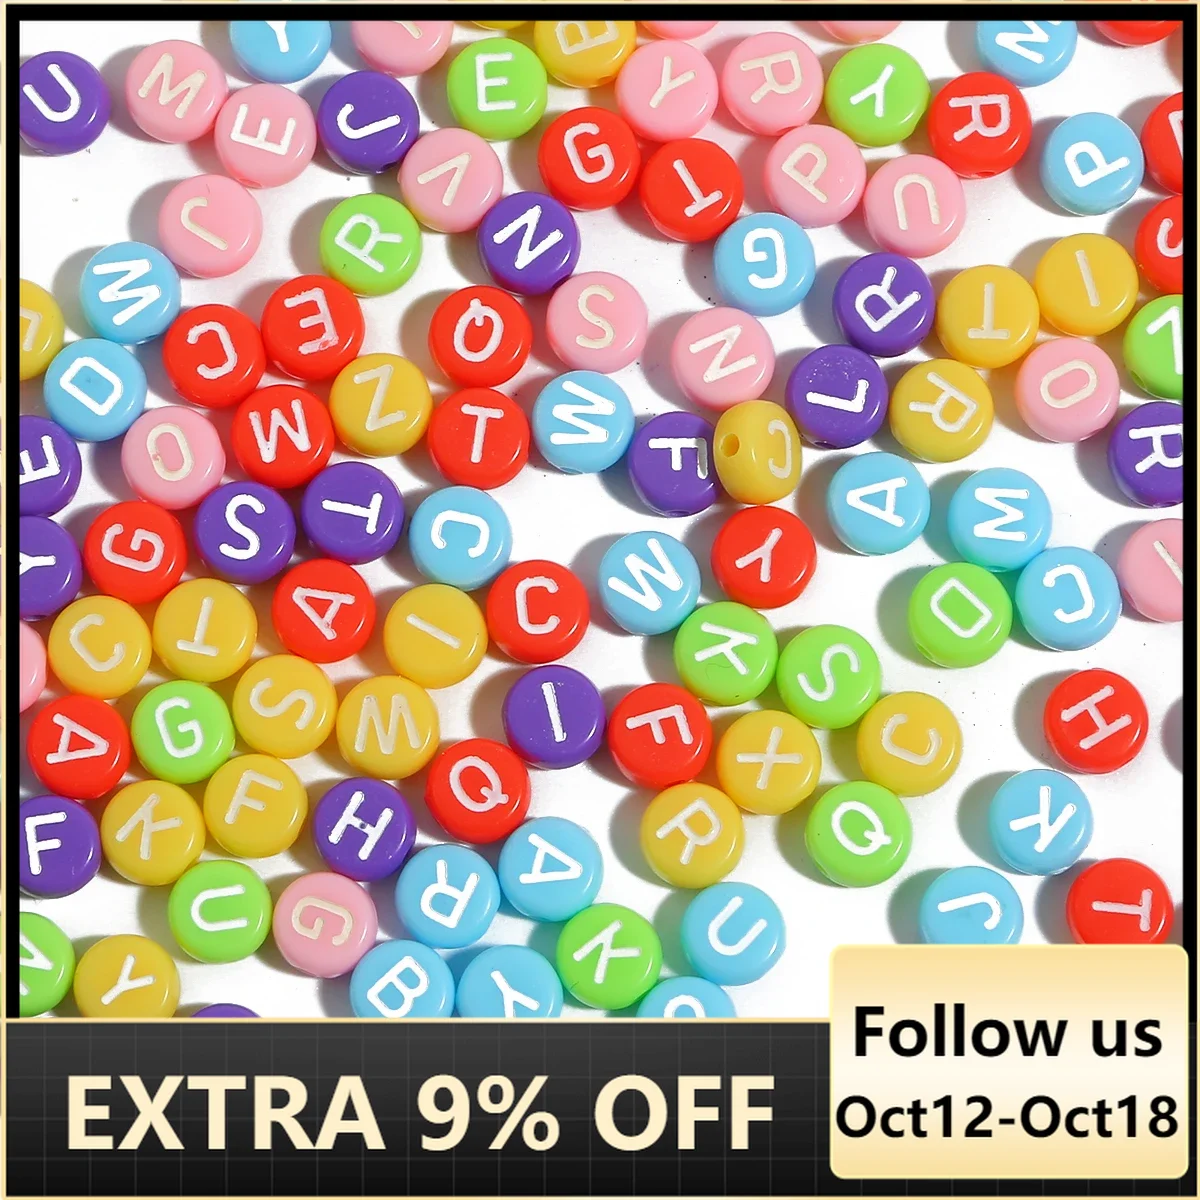 

50pcs Mixed Colorful Round Flat Acrylic Letter Beads Alphabet Digital Cube Loose Spacer Beads For Jewelry Making Diy Bracelet